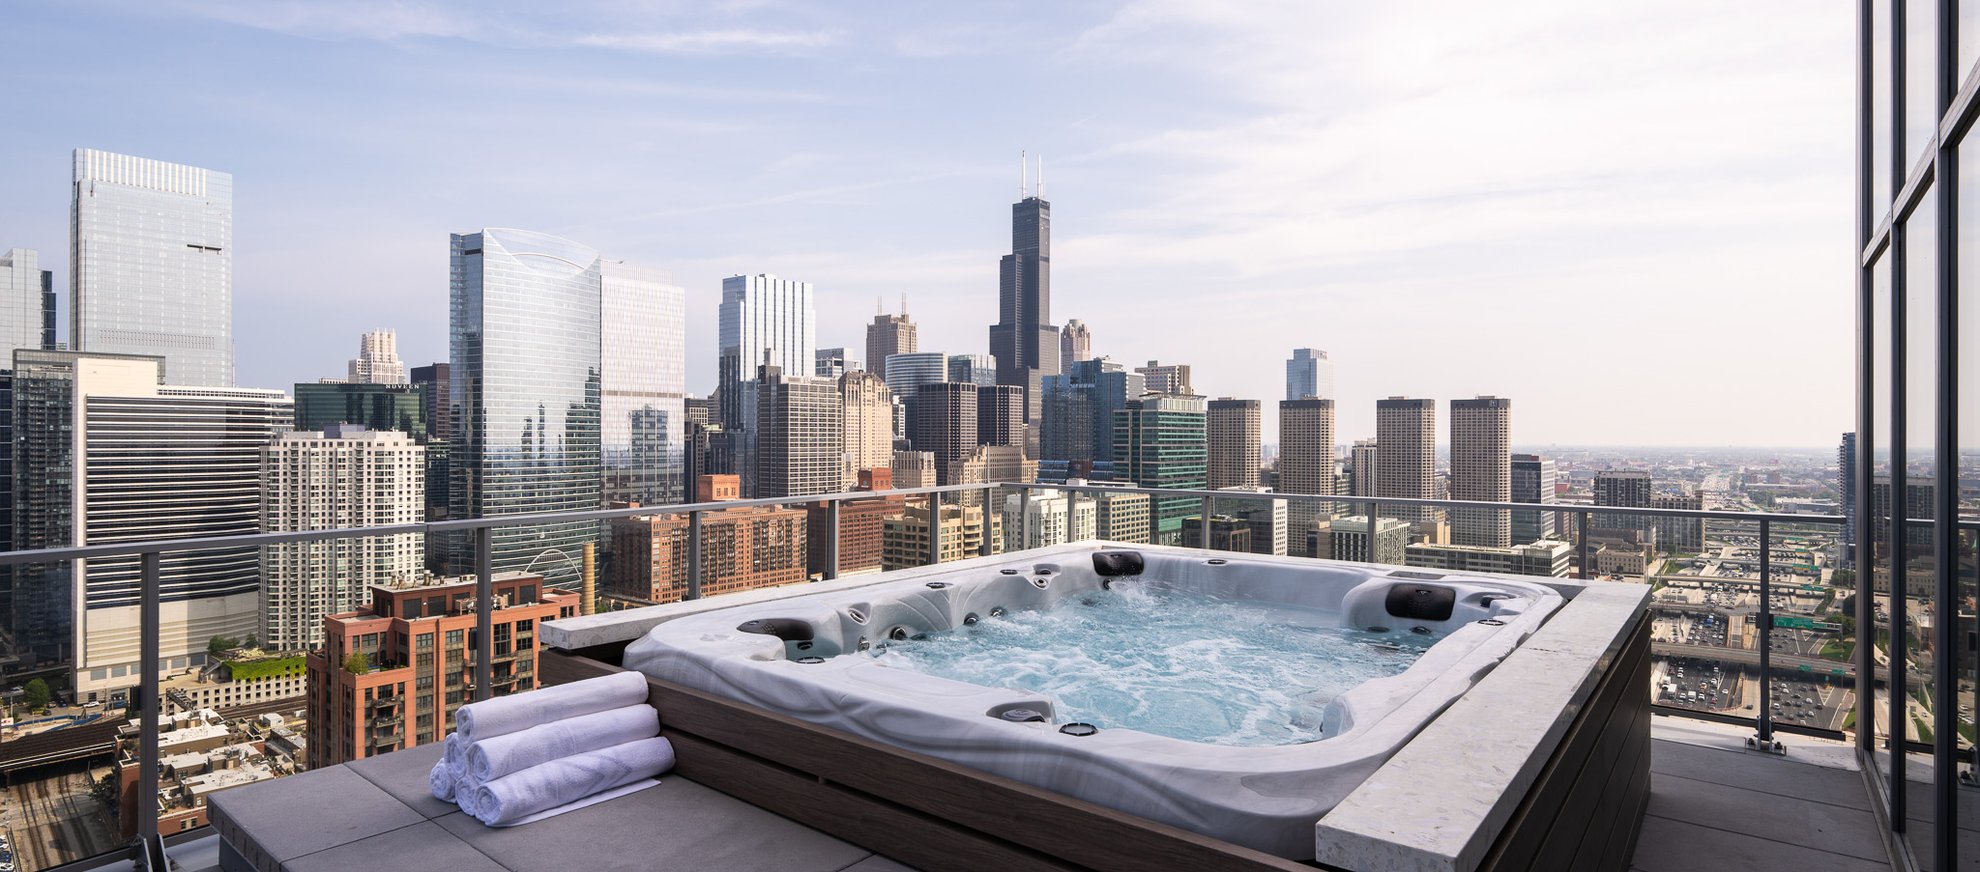 outdoor hot tub at the penthouse level chicago fulton market with chicago skyline view